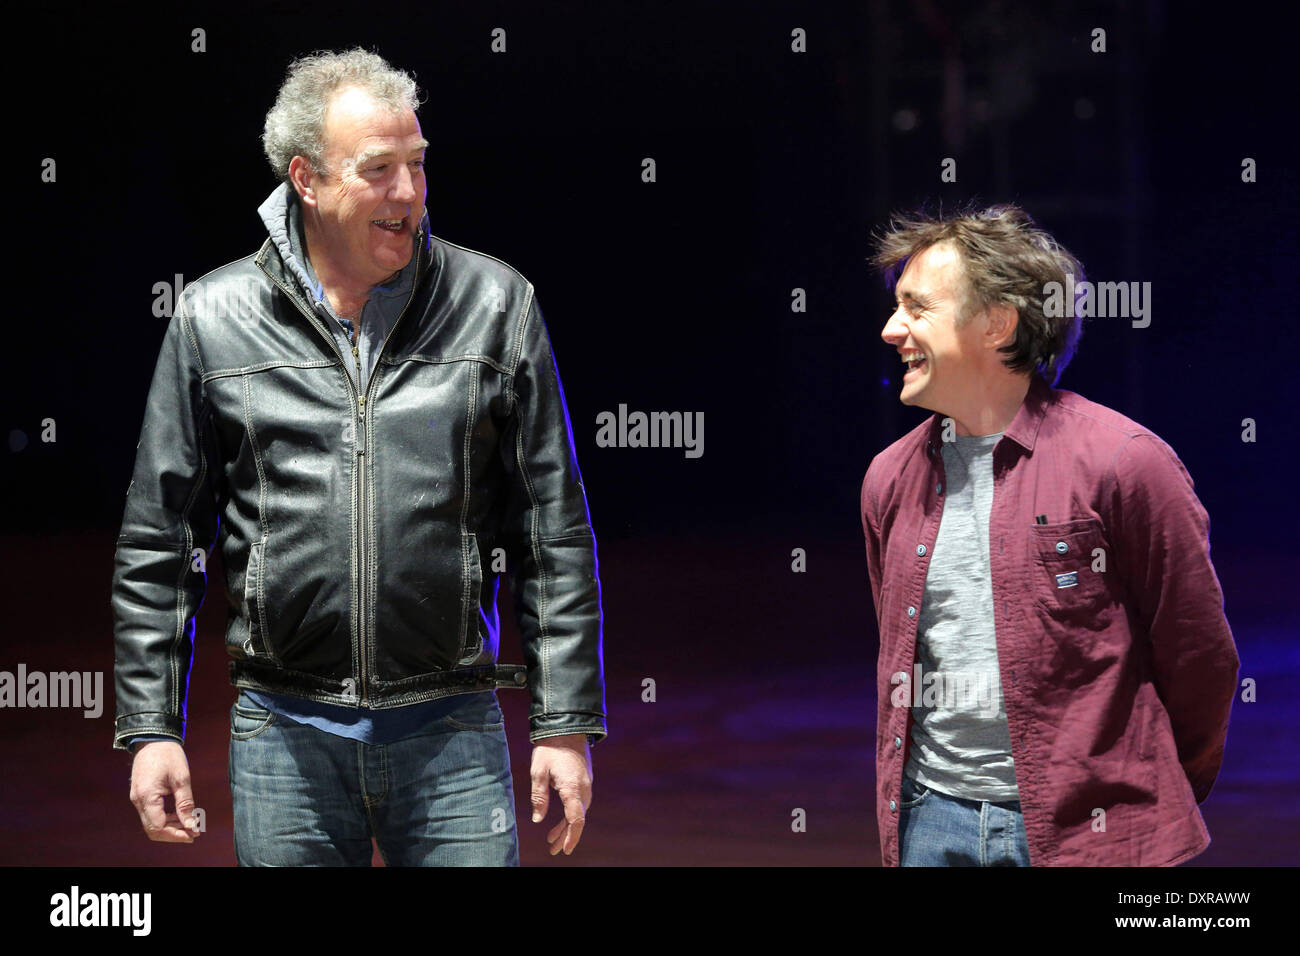 St.Petersburg, Russia. 29th Mar, 2014. In St. Petersburg, passed a car show Top Gear Live. During the rehearsal of the car show Top Gear Live. British TV program Top Gear Jeremy Clarkson and Richard Hammond during a rehearsal for the show Top Gear Live. Credit:  Andrey Pronin/NurPhoto/ZUMAPRESS.com/Alamy Live News Stock Photo